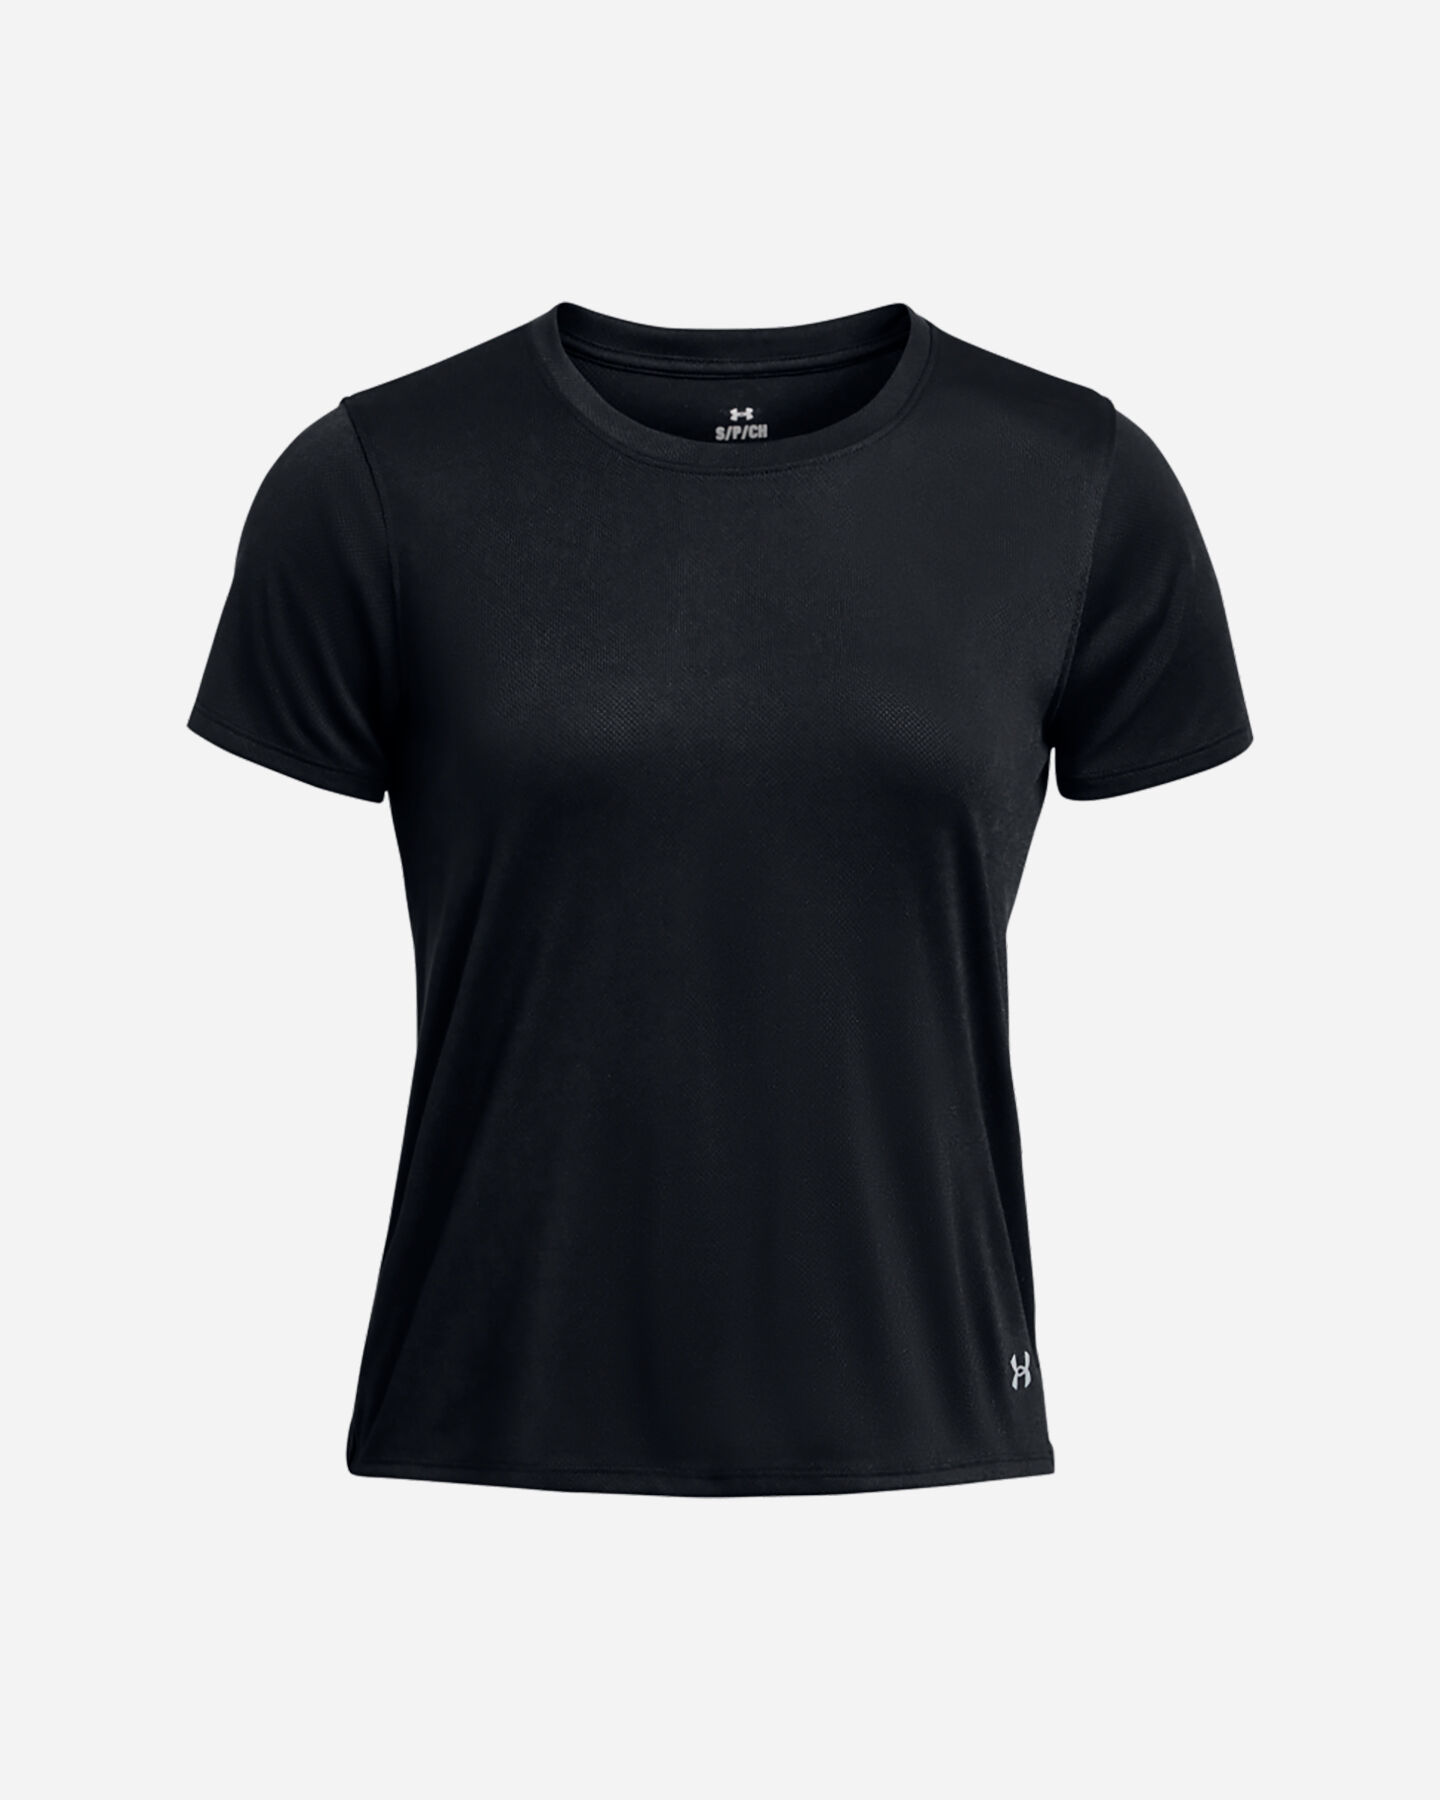  T-Shirt running UNDER ARMOUR STREAKER W S5641395|0001|XS scatto 0